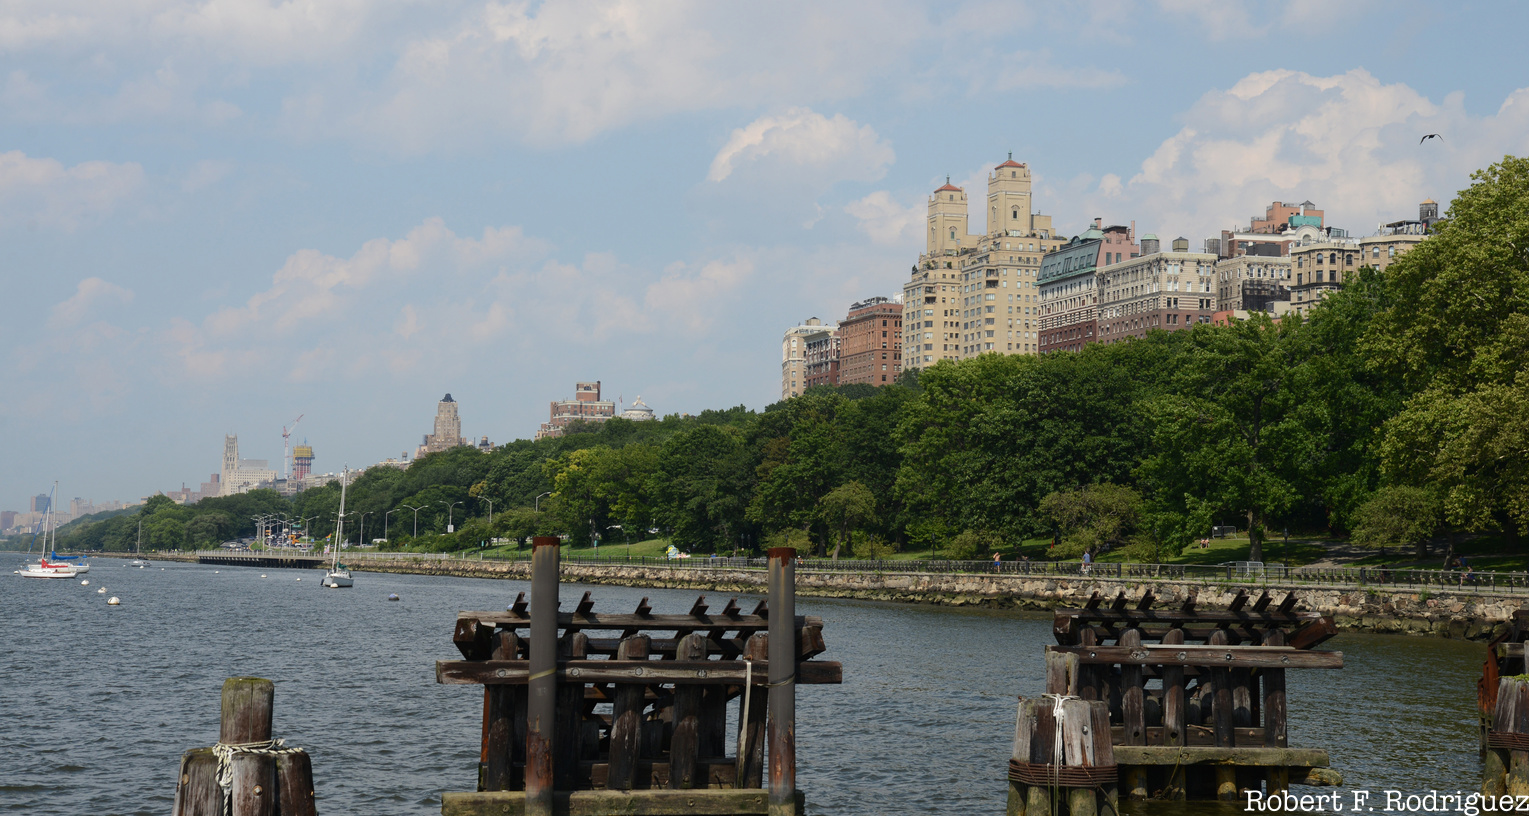 A view of Riverside Drive from the Hudson River